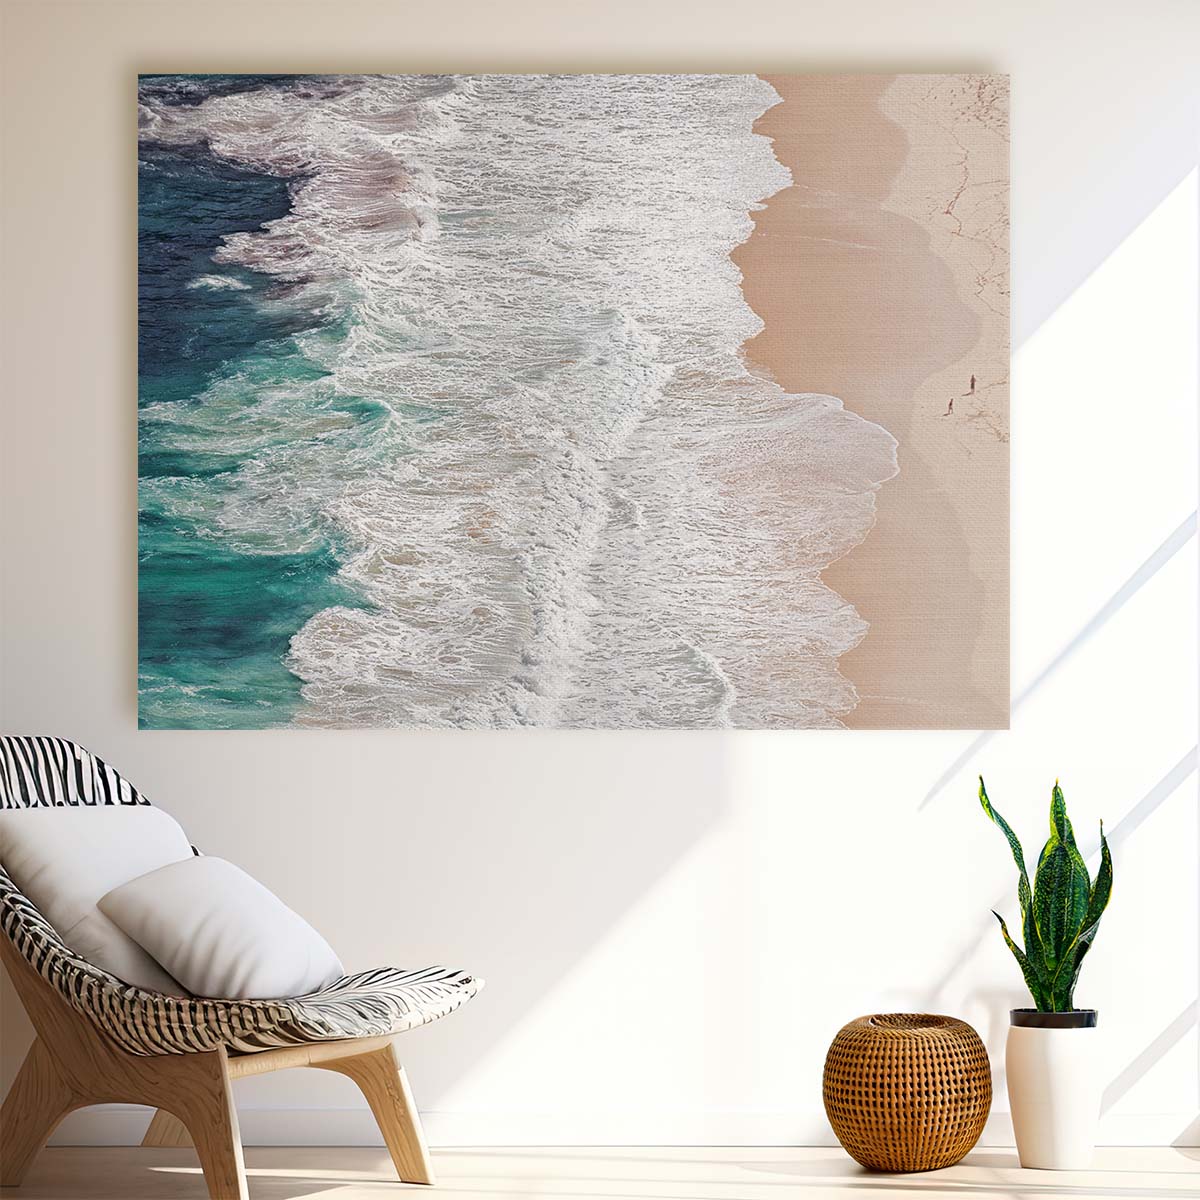 Atlantic Surf & Sand South African Seascape Wall Art by Luxuriance Designs. Made in USA.